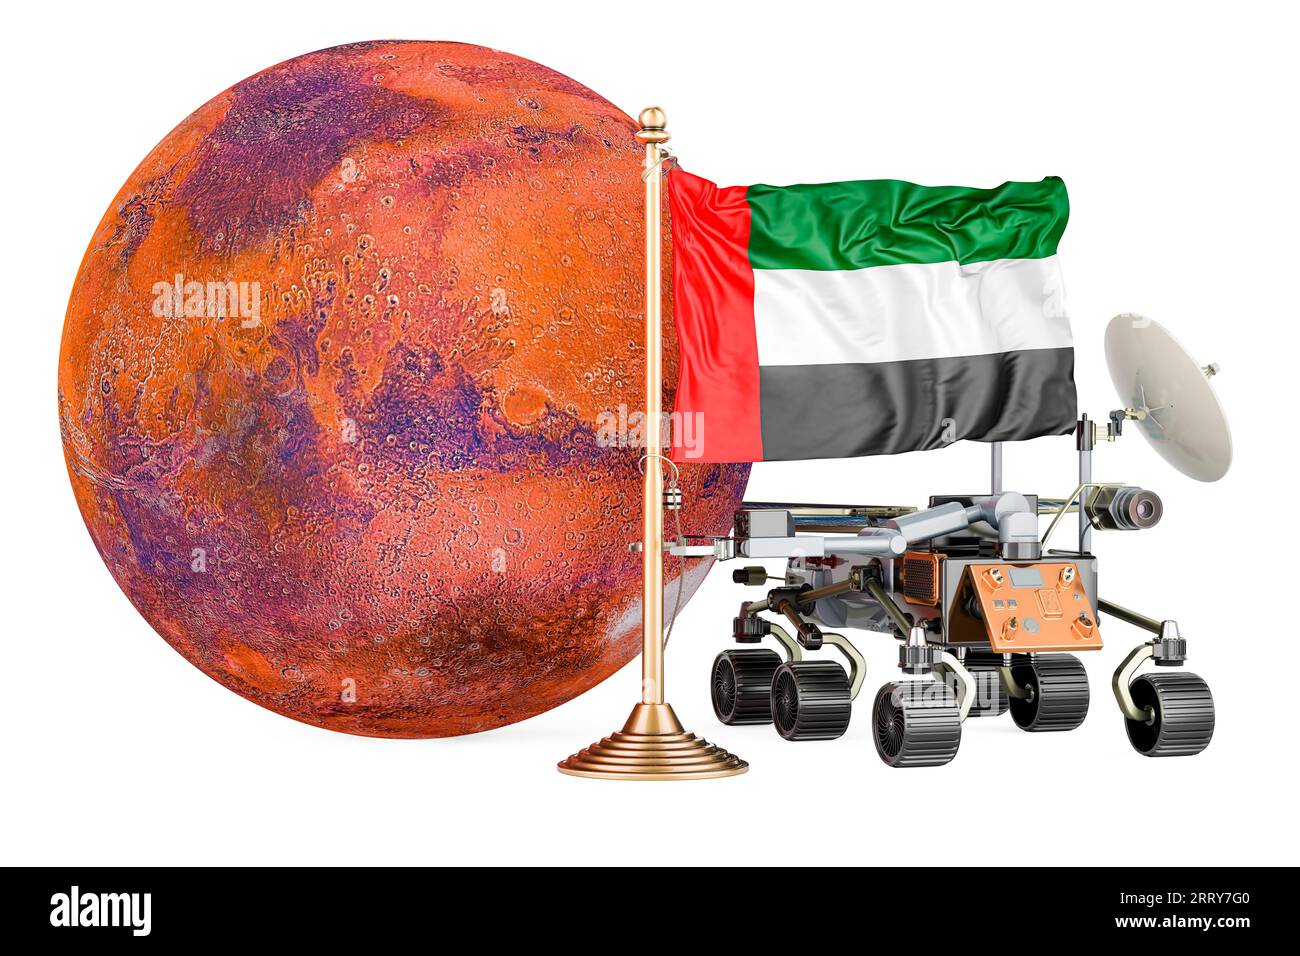 The UAE Mars Exploration Program. Planetary rover with Mars and the ...